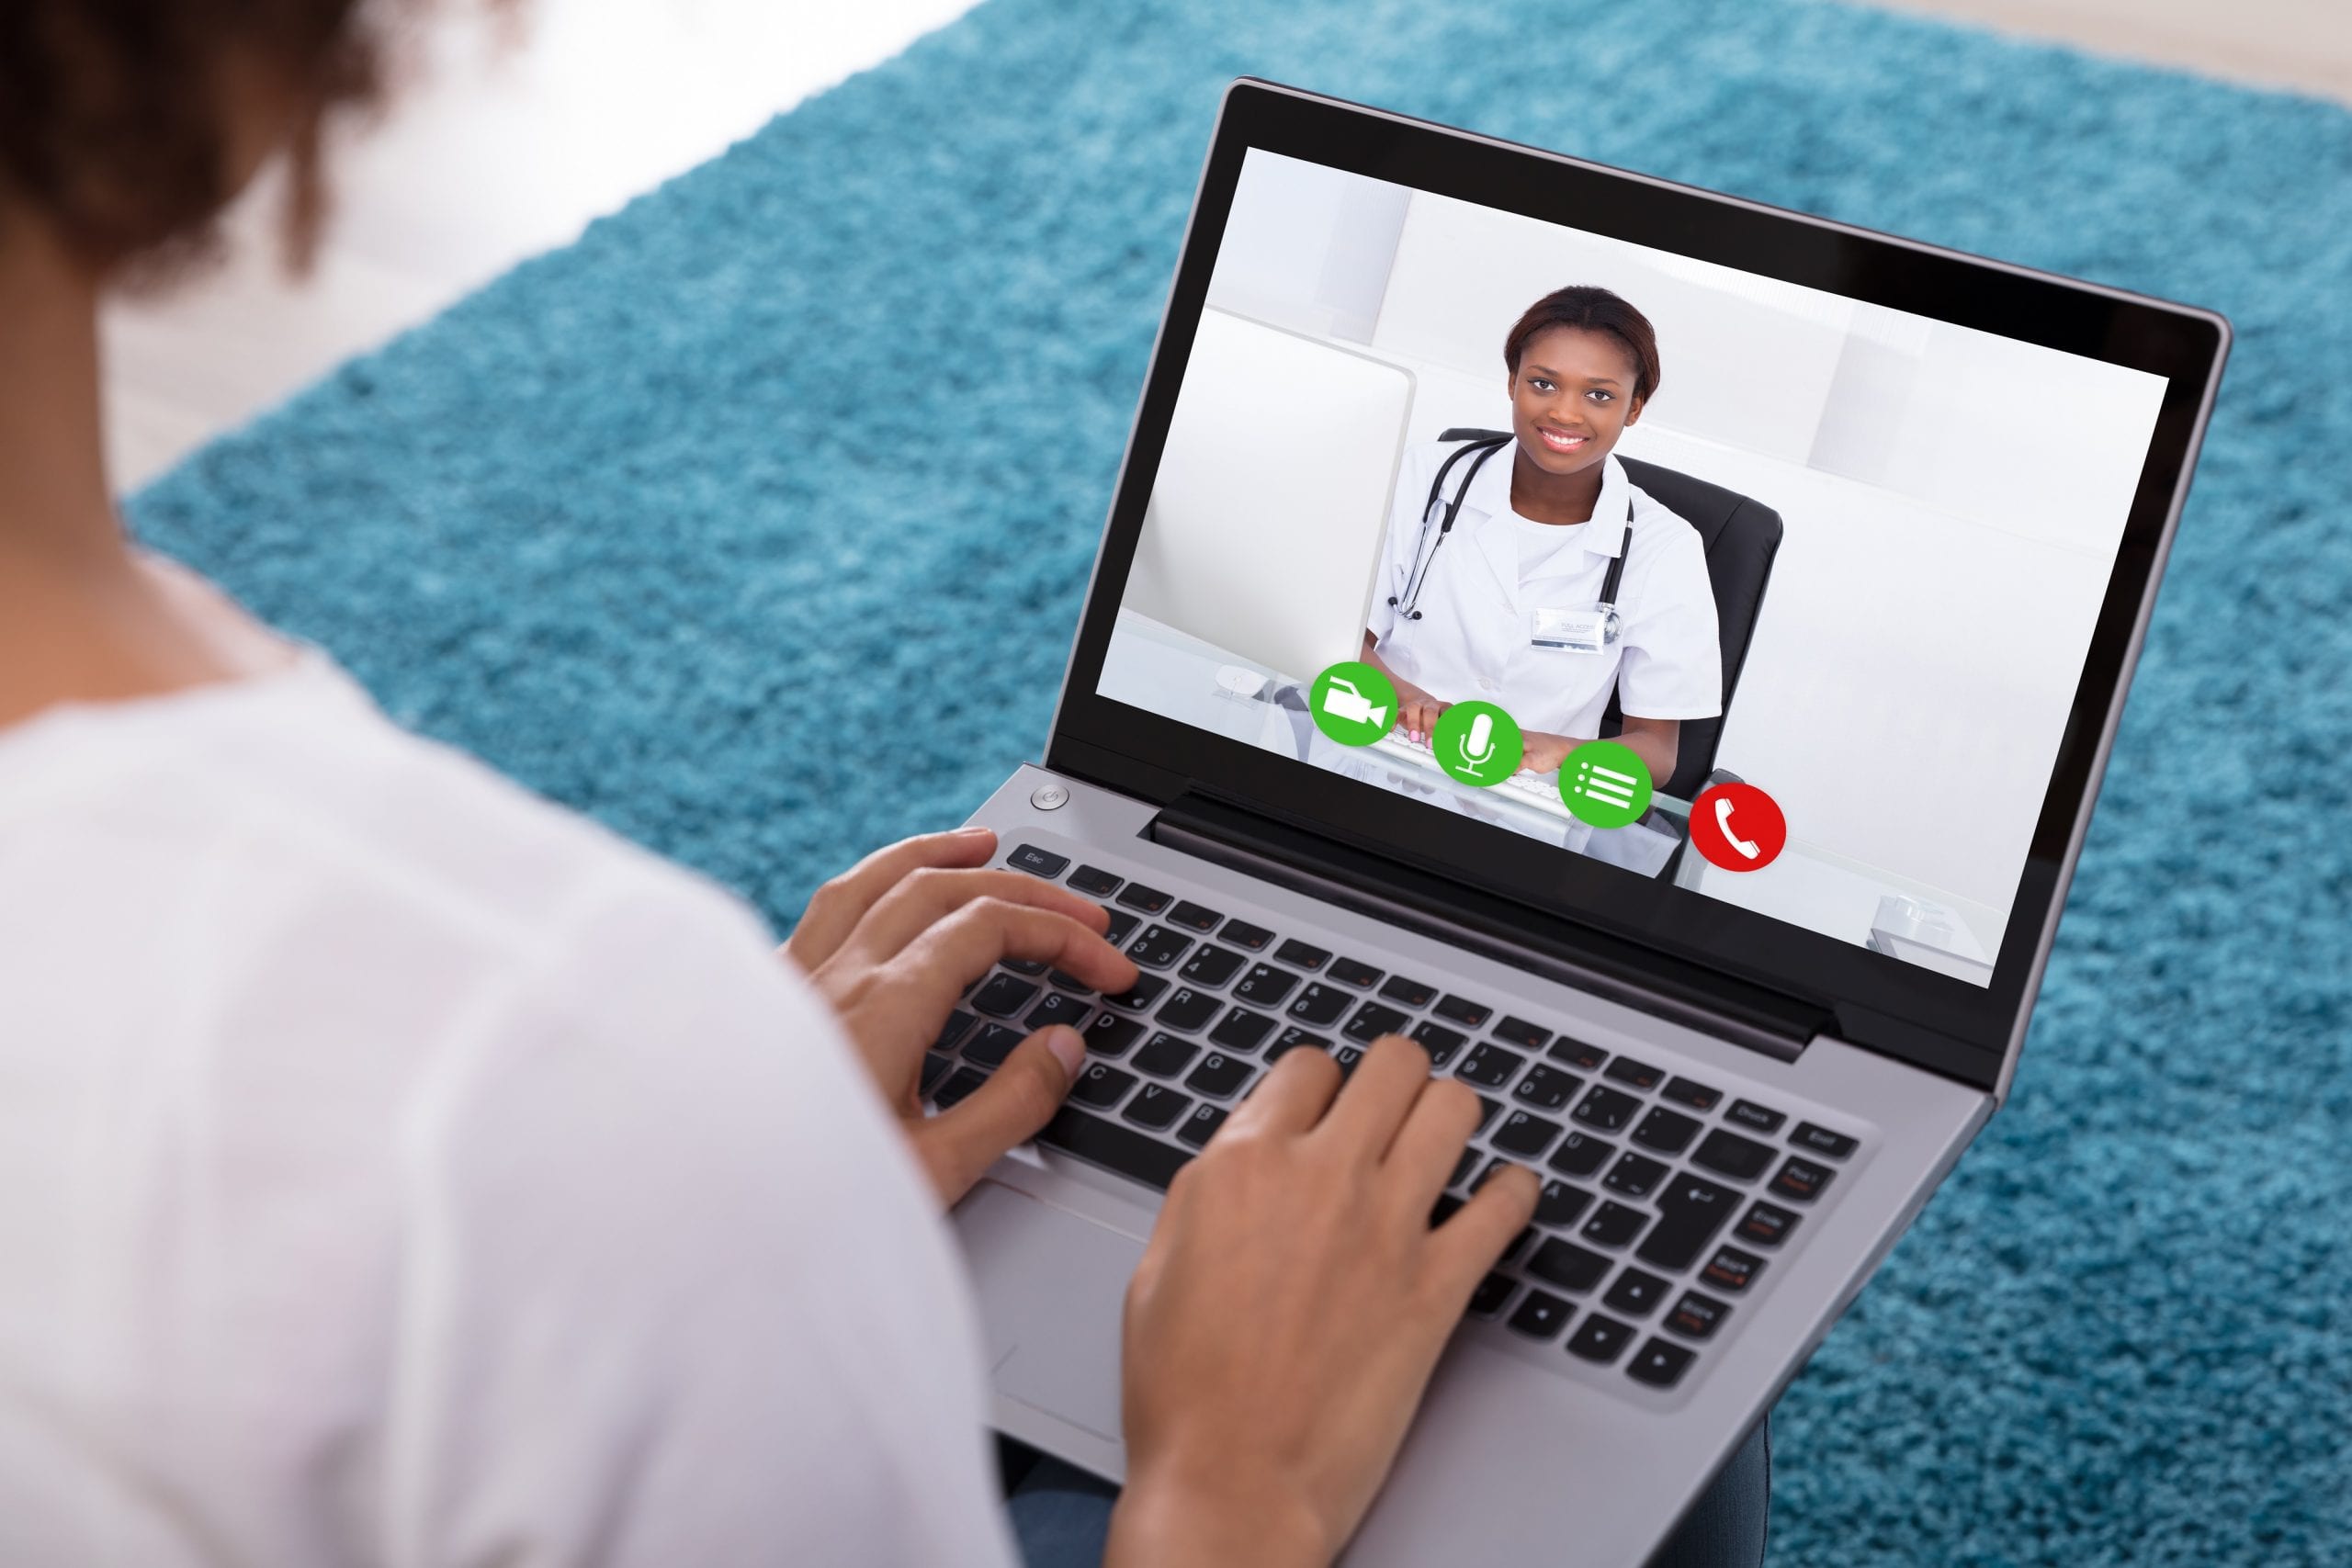 Overland IOP| #1 Intensive Outpatient Programs | Los Angeles CA Telemedicine vs Telehealth: What’s the Difference?